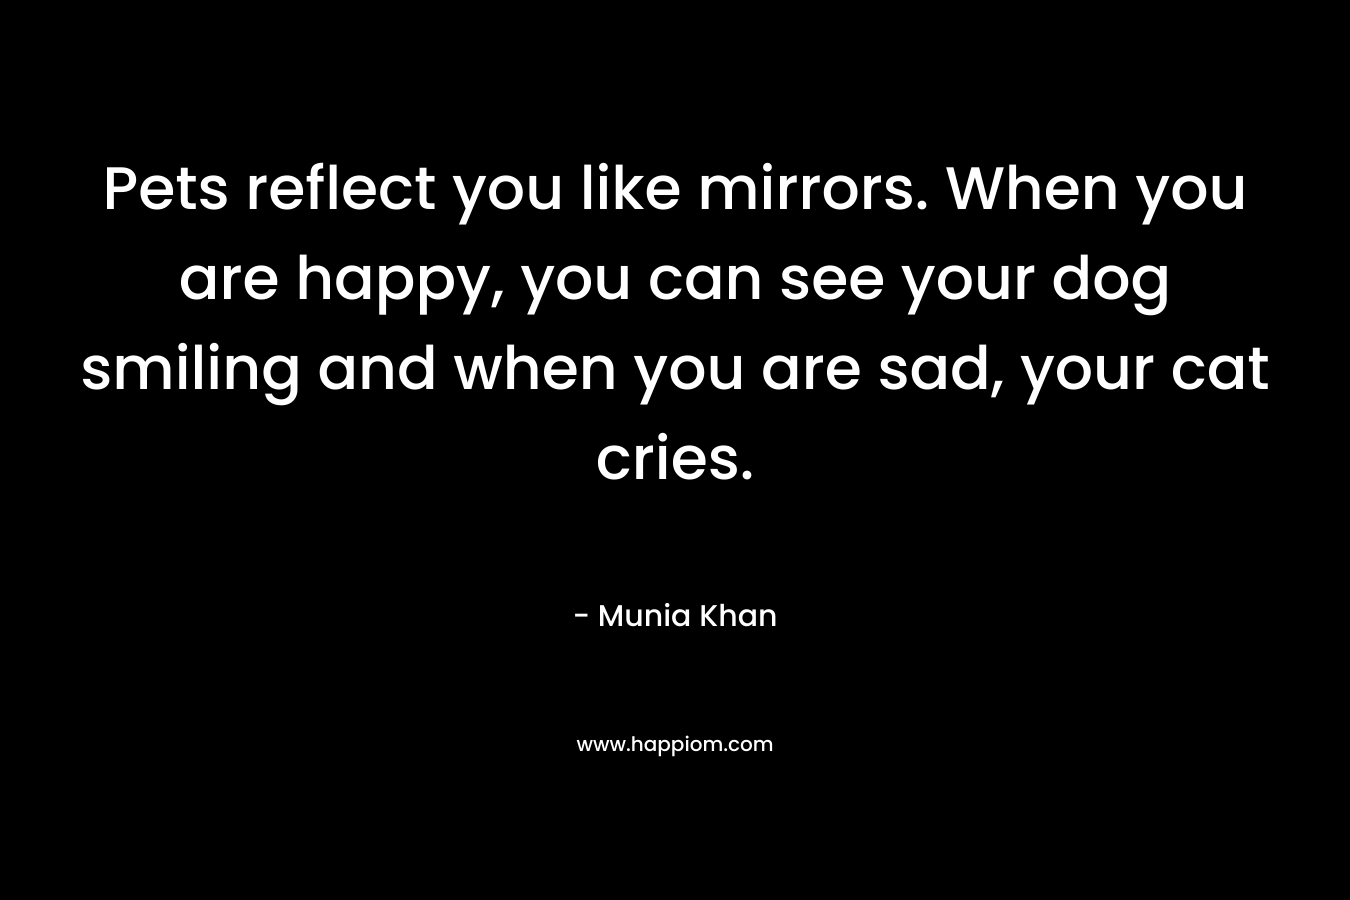 Pets reflect you like mirrors. When you are happy, you can see your dog smiling and when you are sad, your cat cries. – Munia Khan